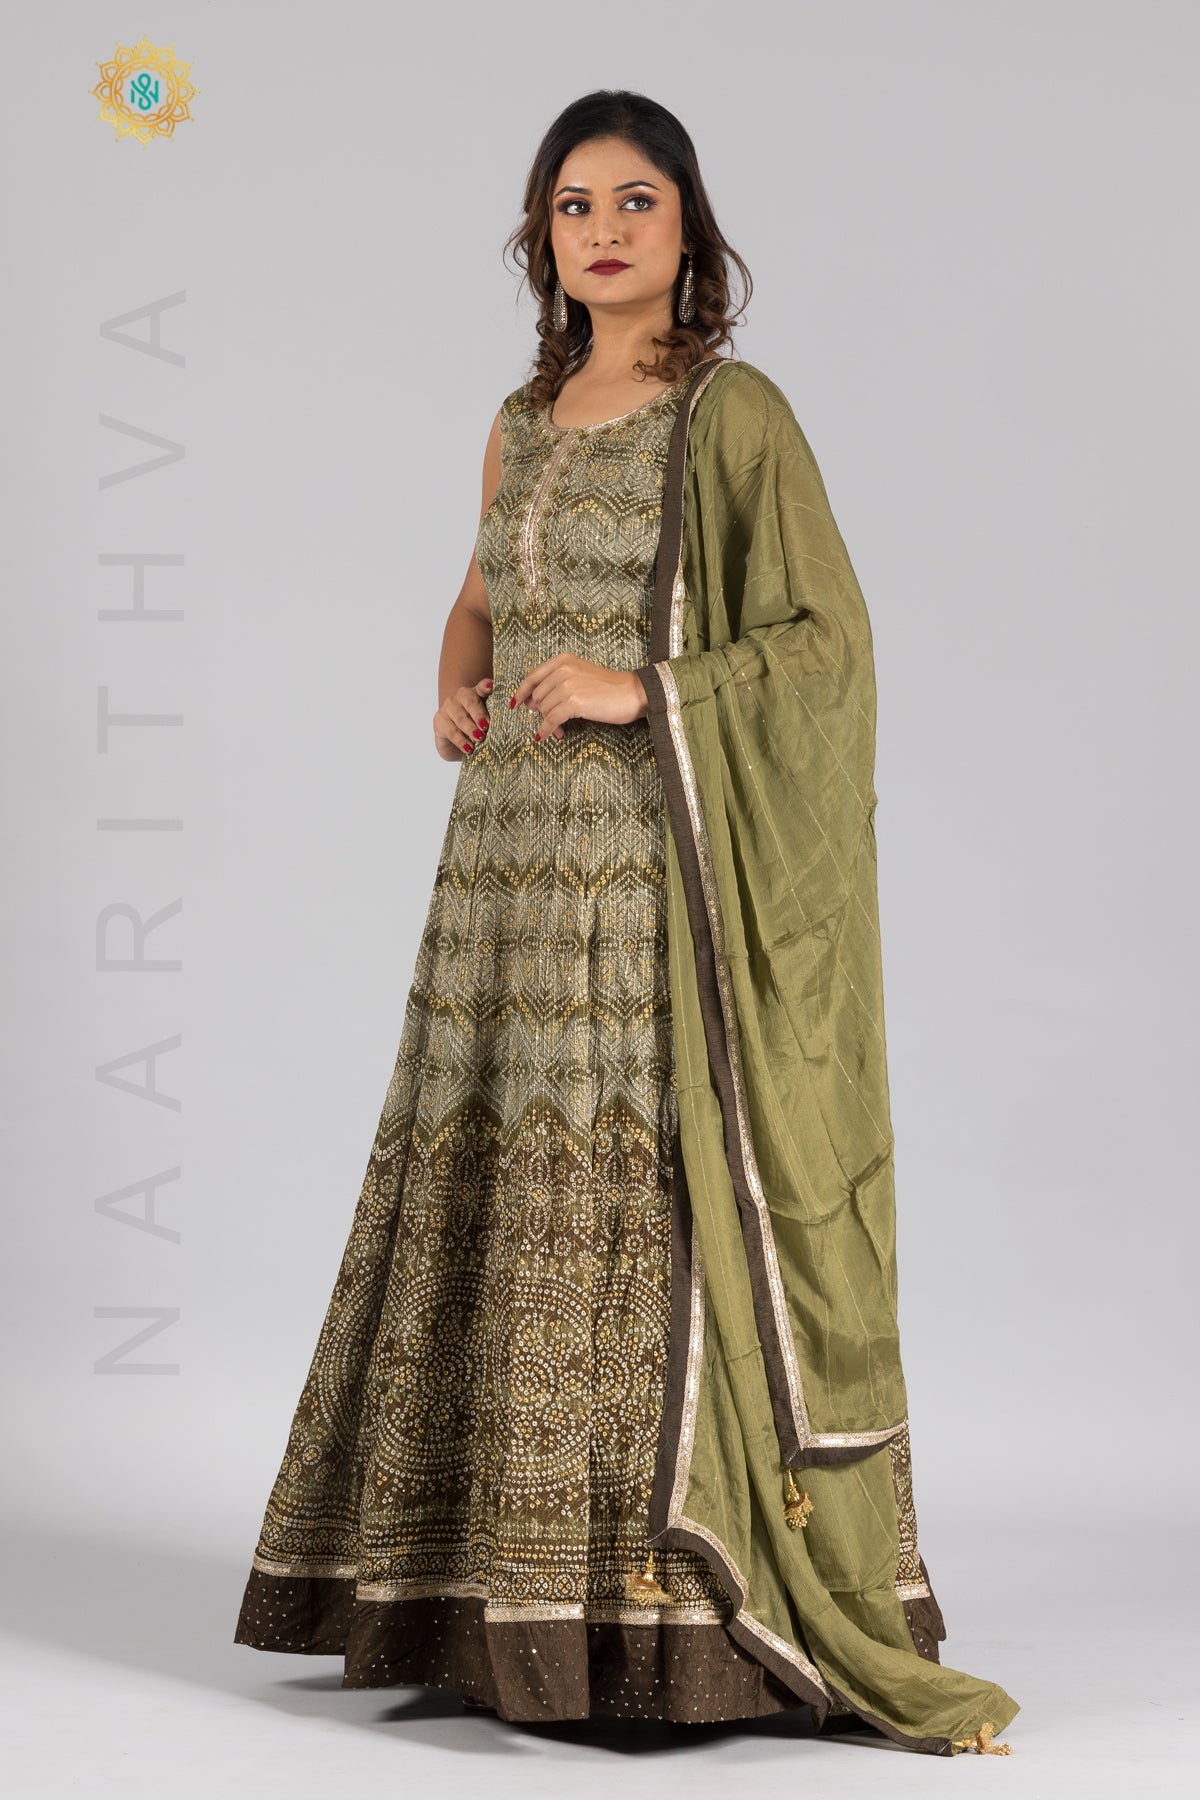 PARTY WEAR GOWN WITH NECK EMBROIDERY & DUPATTA